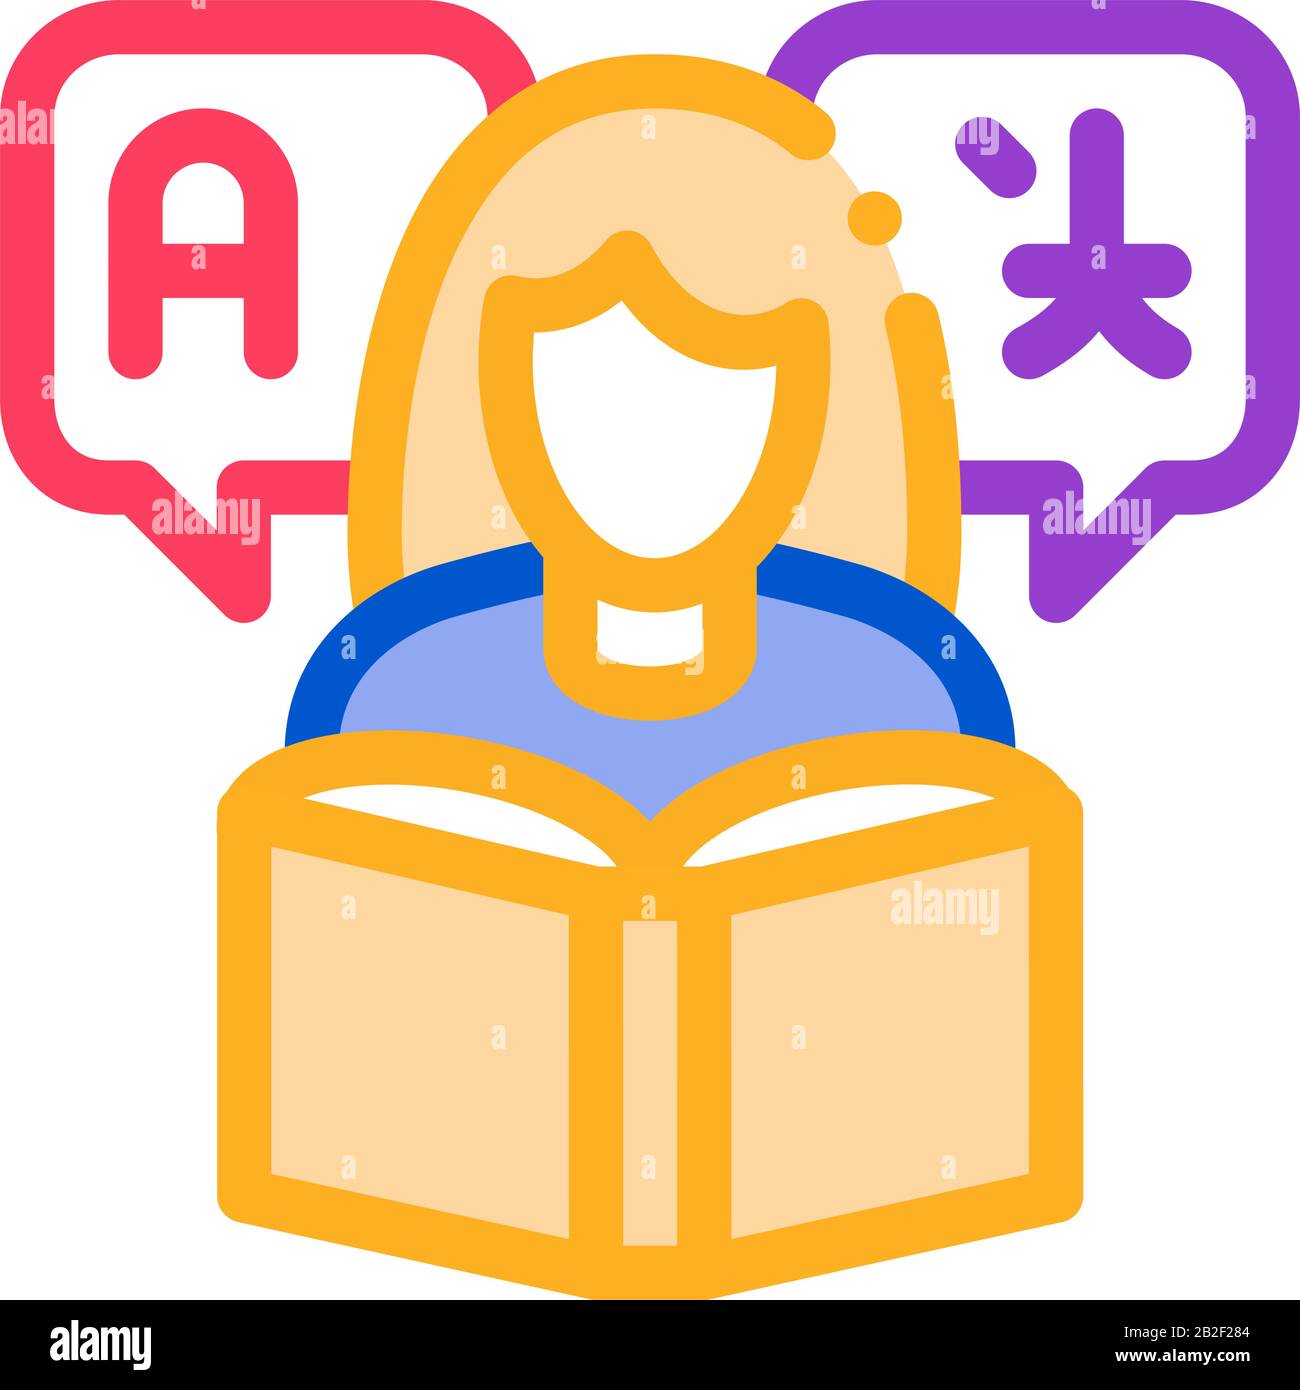 Books for learning the Japanese language Stock Photo - Alamy